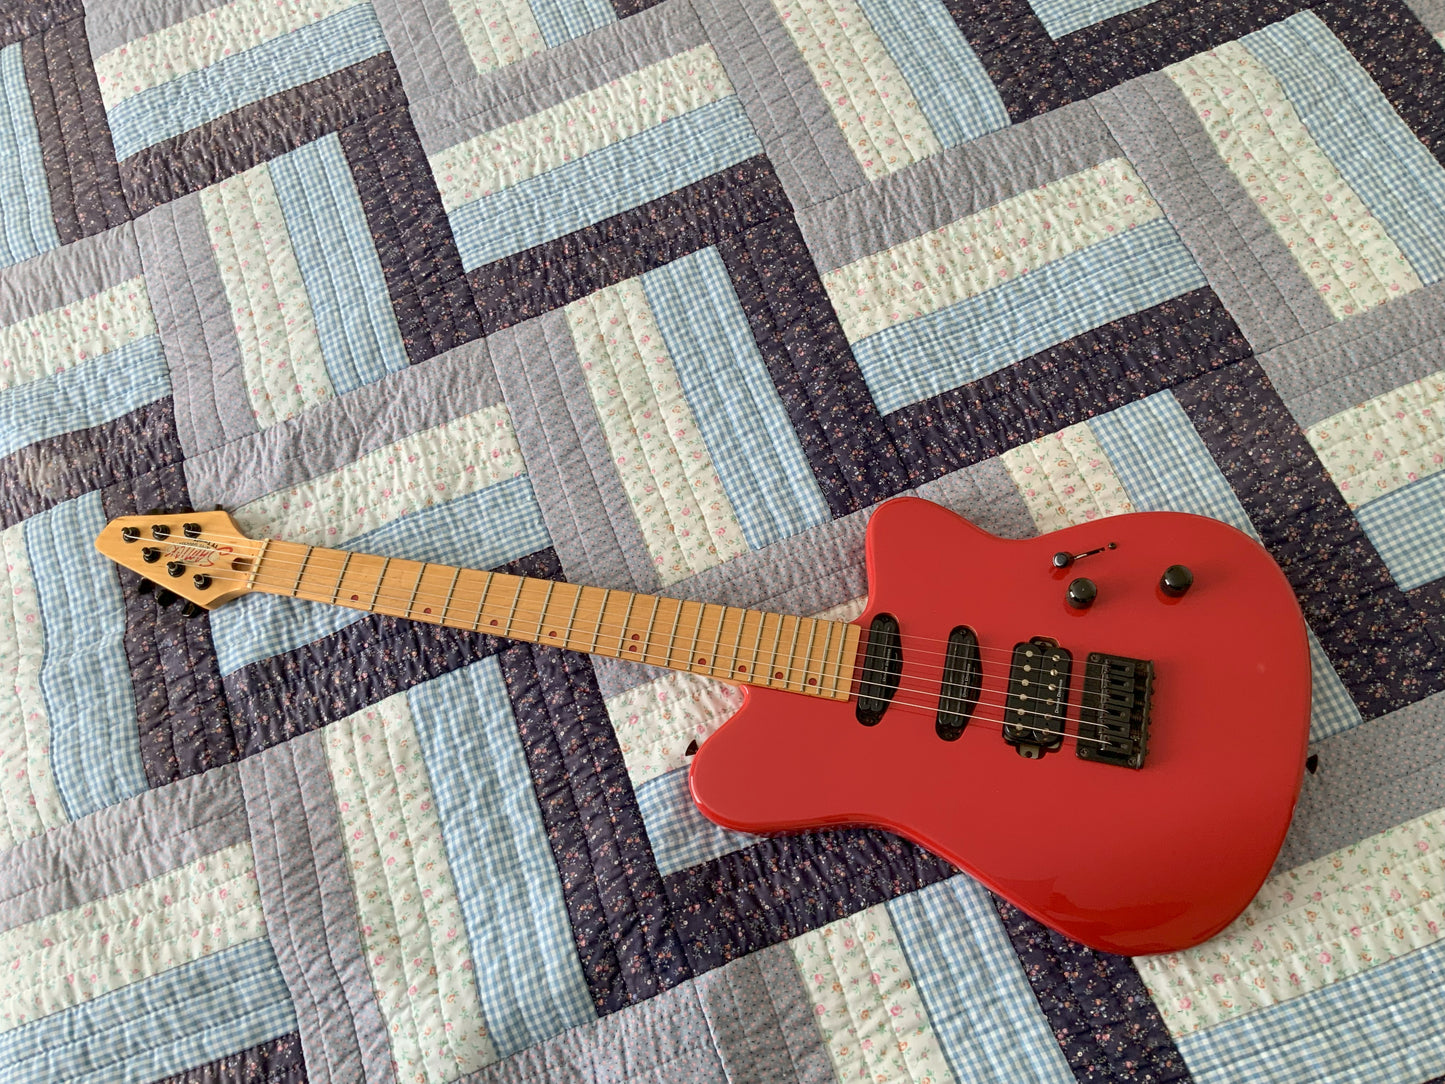 Samick Blues Saraceno TV20 Hardtail Gloss Red  - Excellent Condition